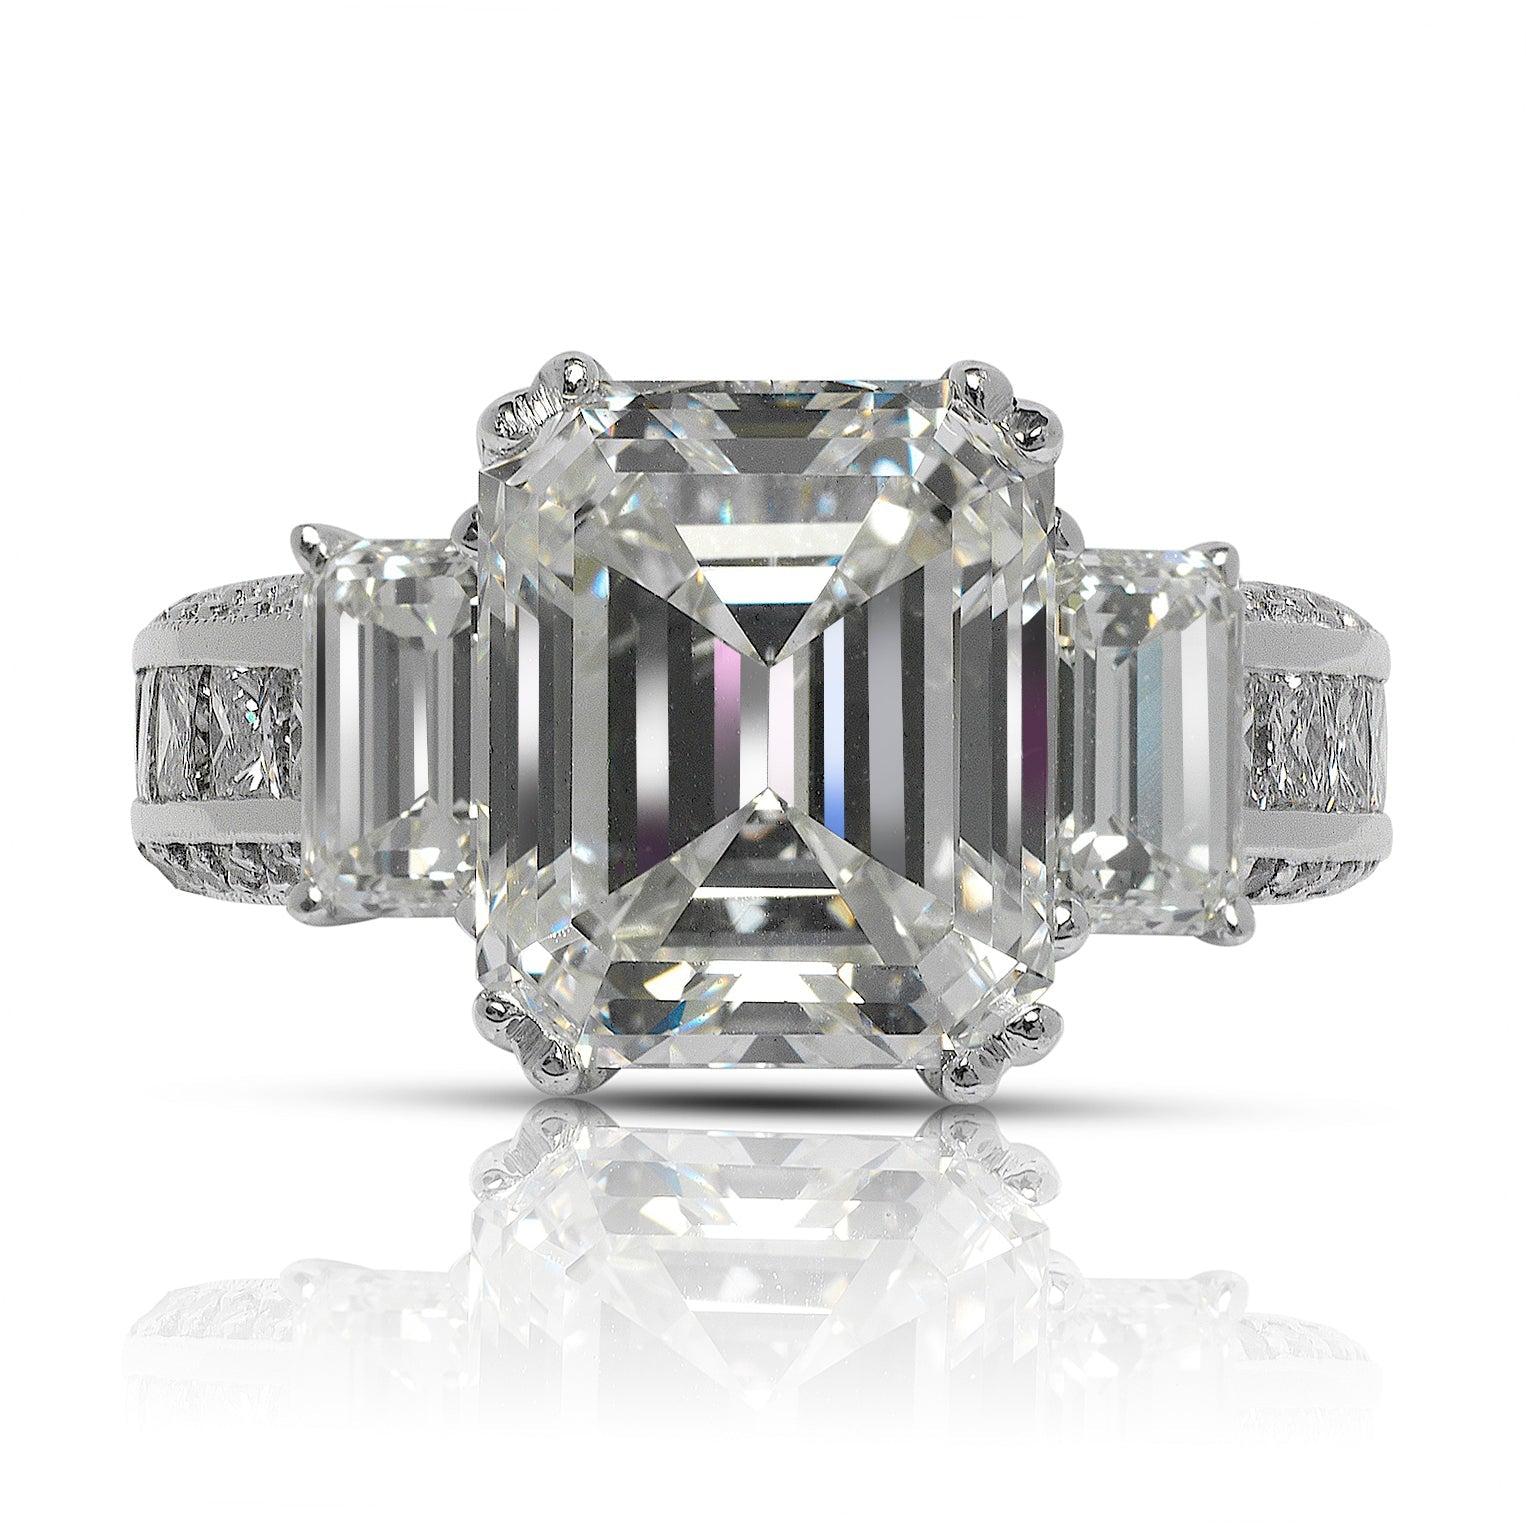 NINA EMERALD CUT THREE STONE BAGUETTE DIAMOND RING WITH CHANEL SET BAND IN  18K WHITE GOLD

GIA CERTIFIED 
Center Diamond
Carat Weight: 5.1 Carats
Color :   J
Clarity:  VVS2
Cut: EMERALD CUT
Measurements: 10.6 x 9.9 x 6.0 mm

Ring:
Metal: 18K WHITE